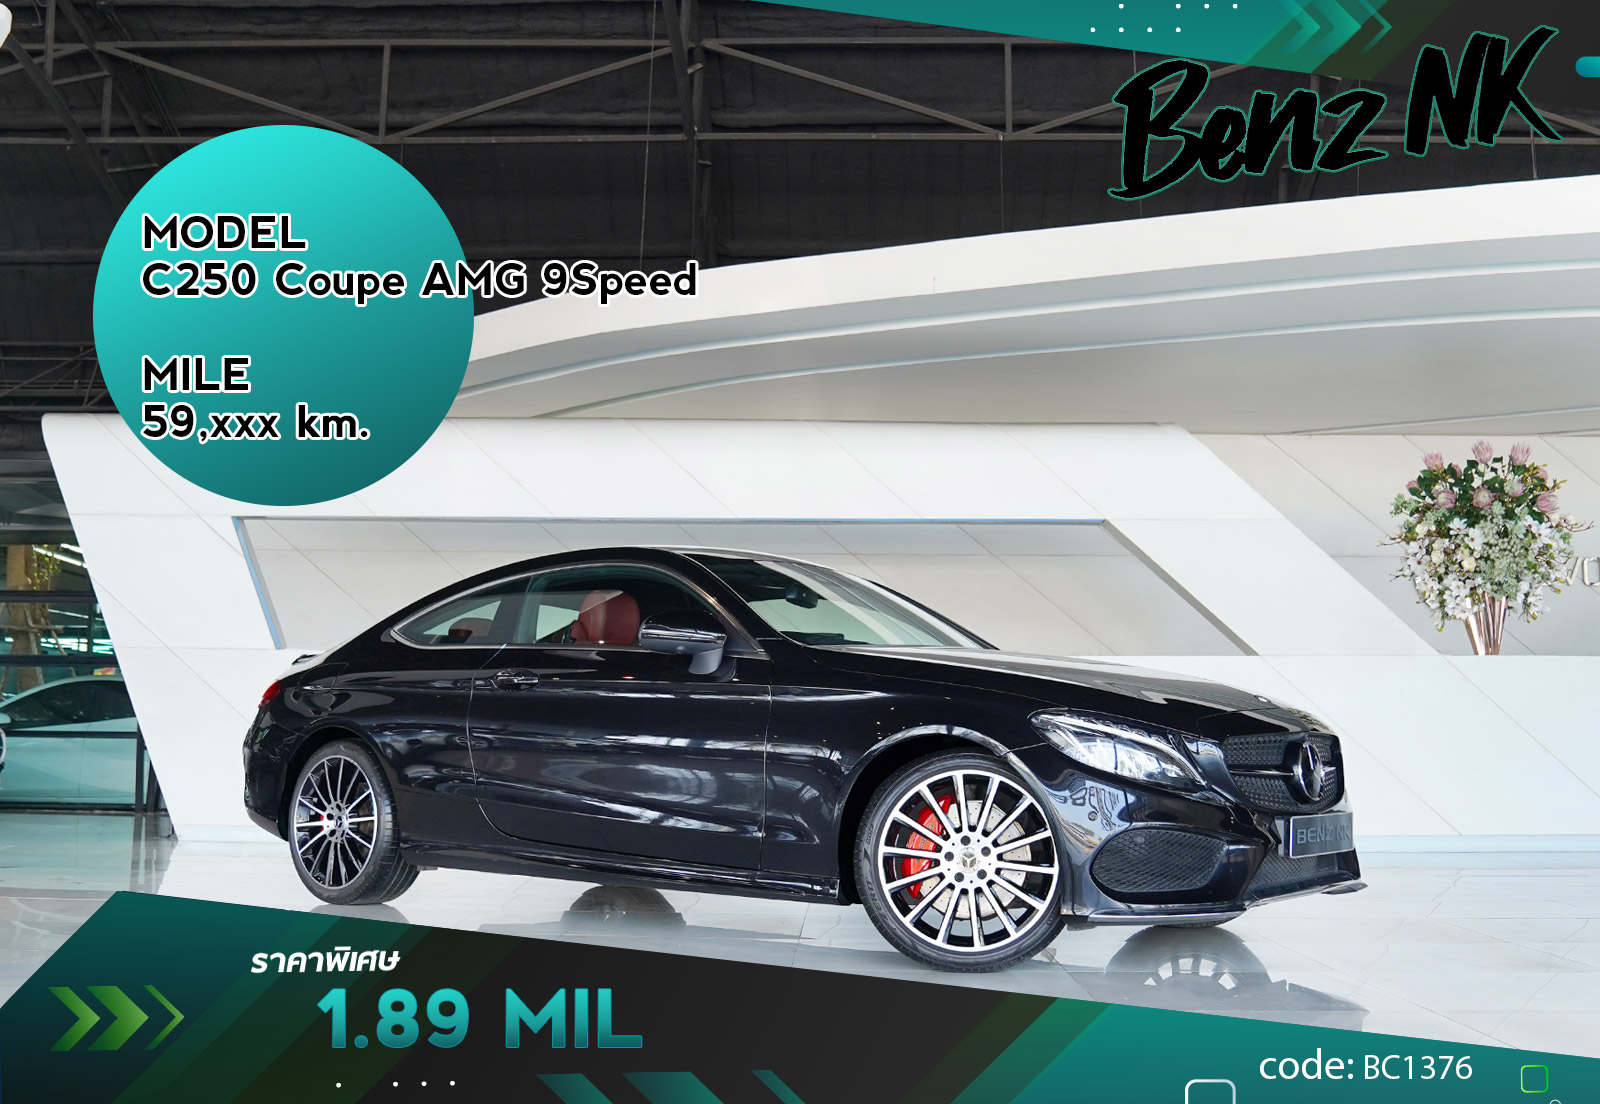 C250 Coupe AMG 9 Speed Mercedes Benz